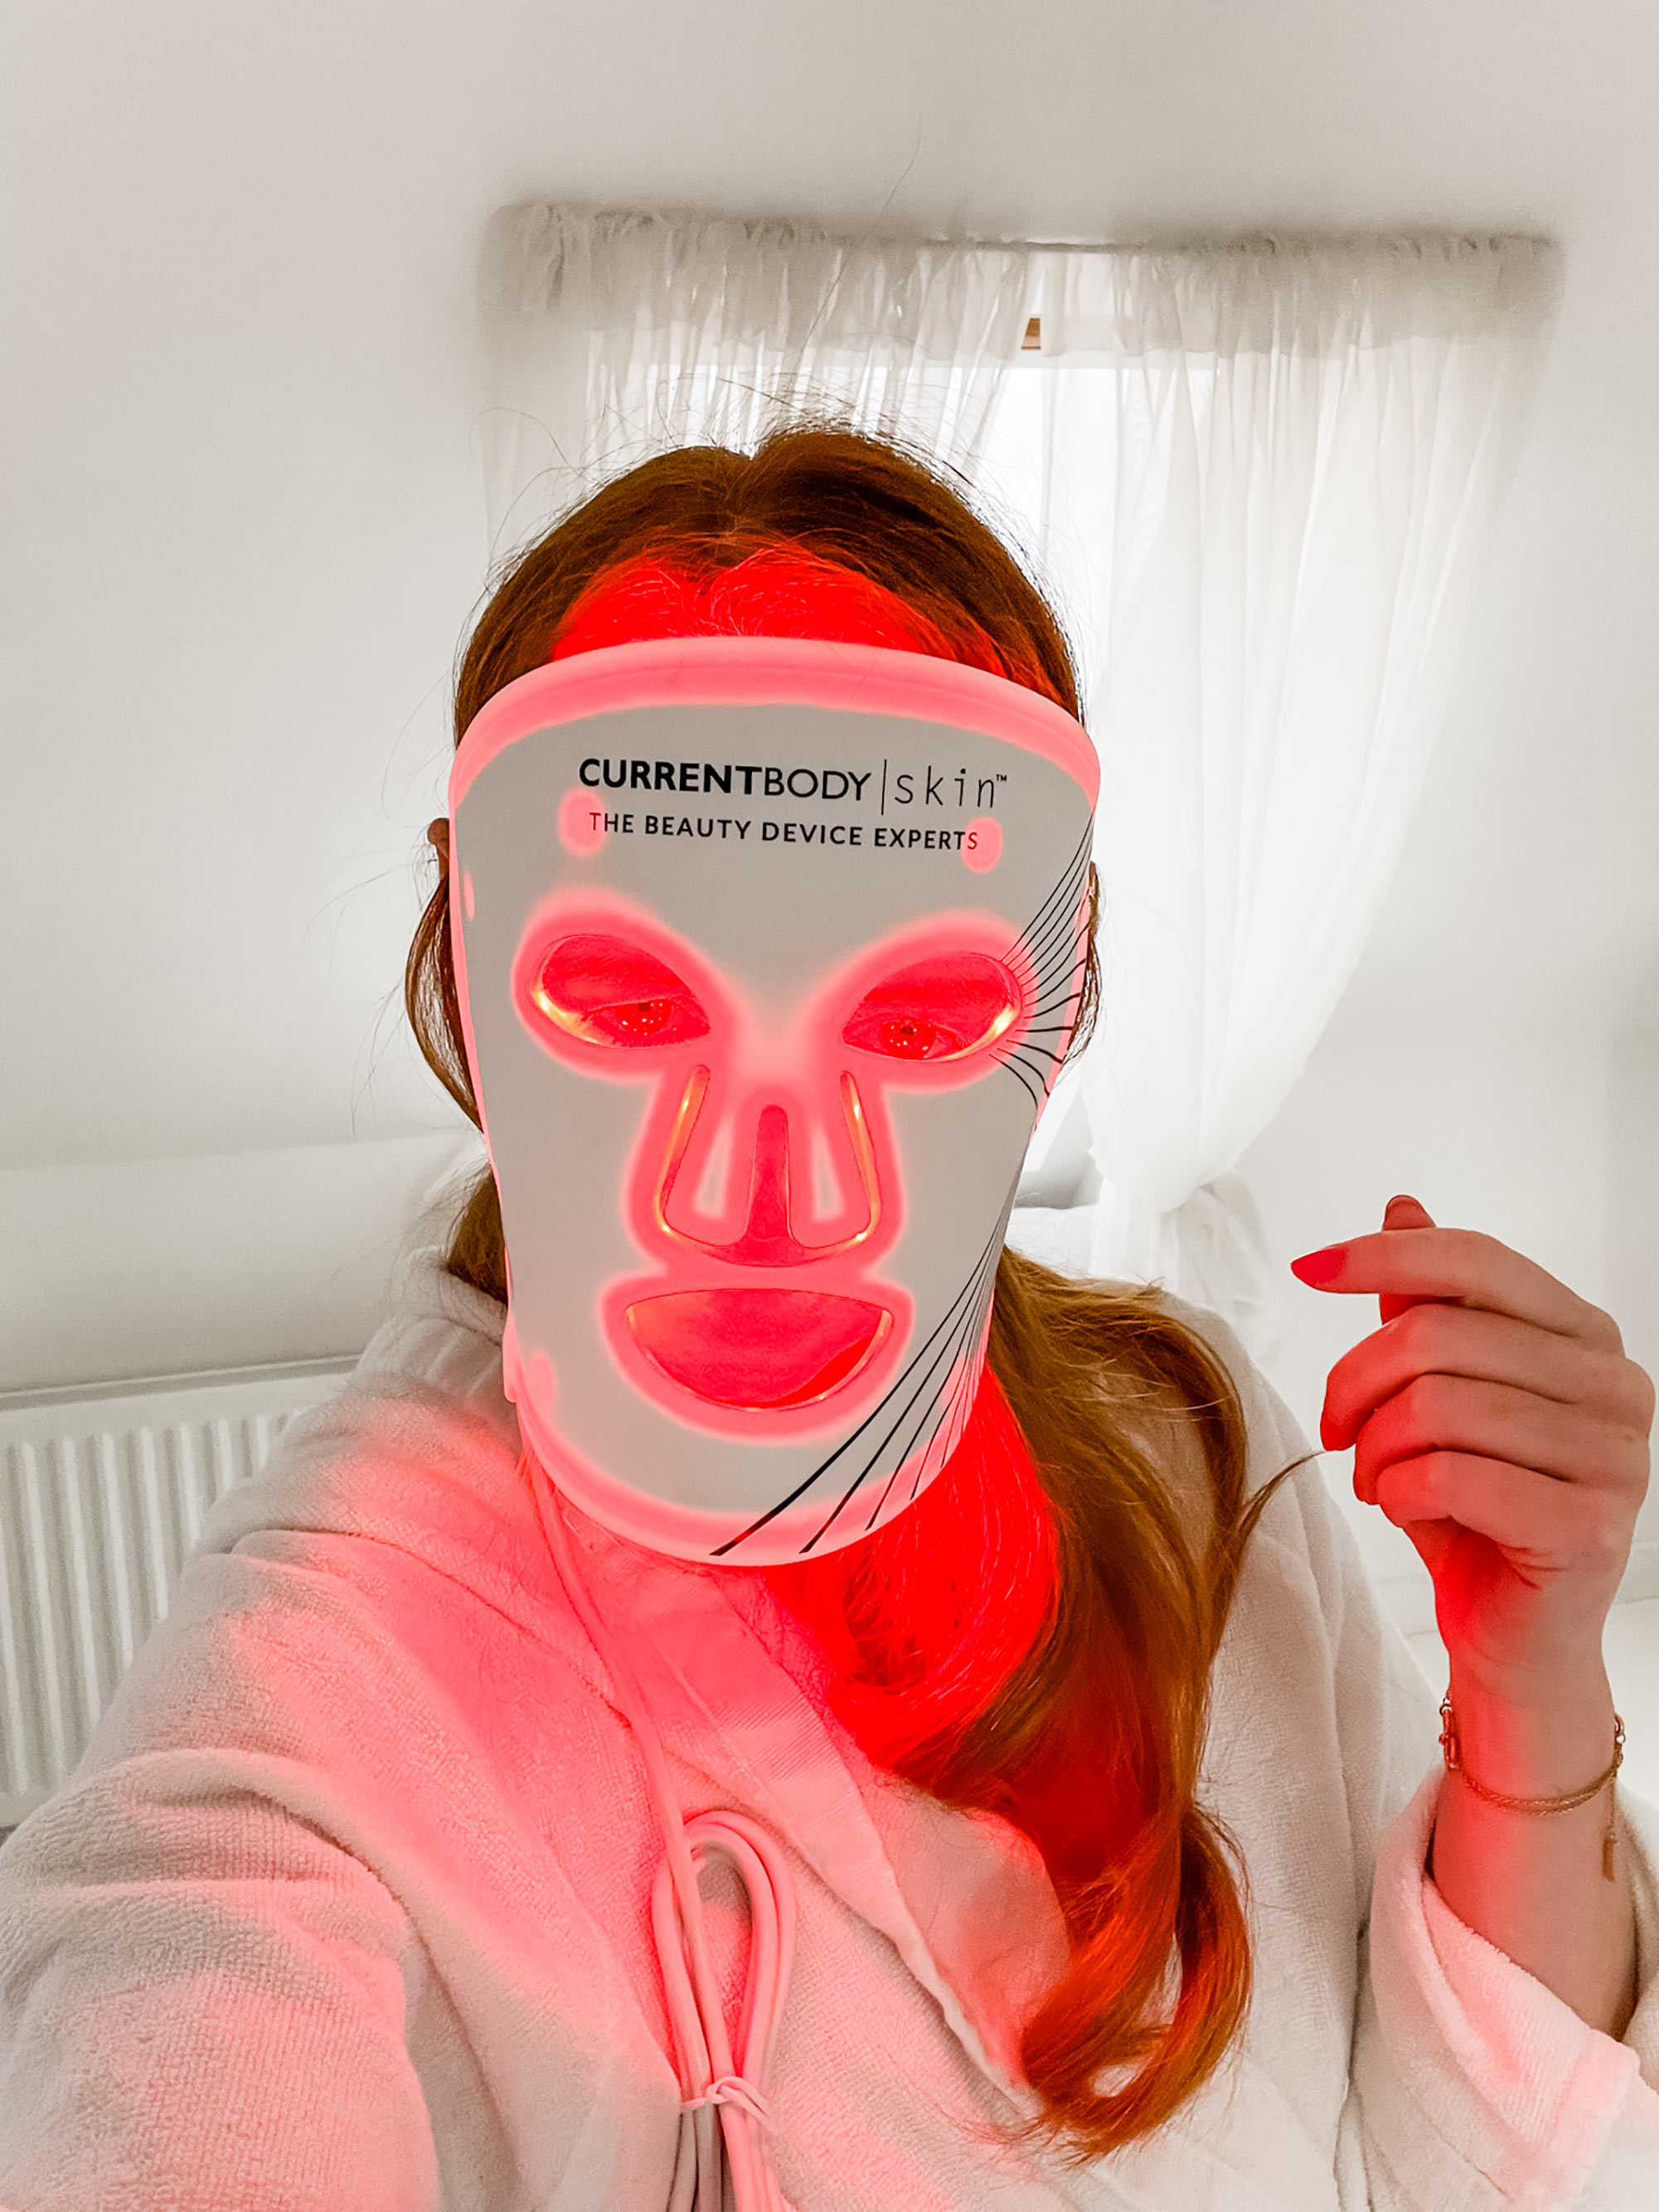 trying out LED light therapy for the first time